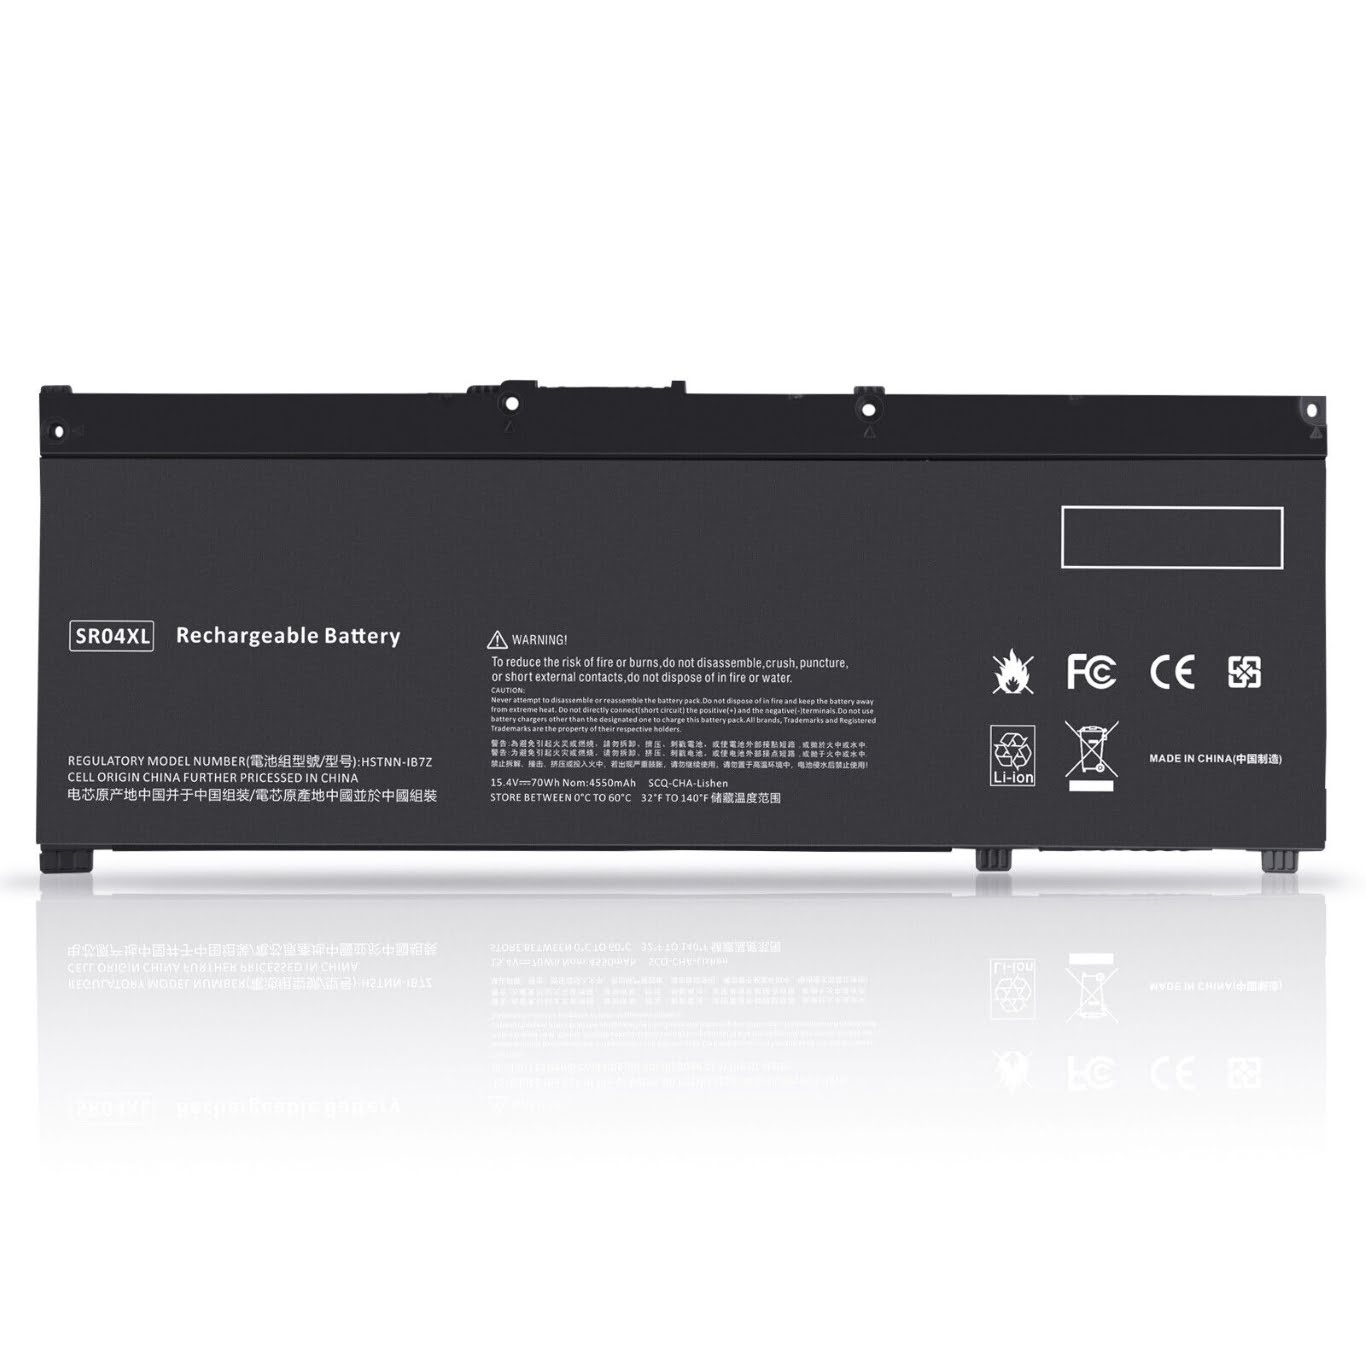 7265NGW, 916678-171 replacement Laptop Battery for HP 15T-CB000, 15T-CB2000, 15.4 V, 4 cells, 4550mah / 70.07wh